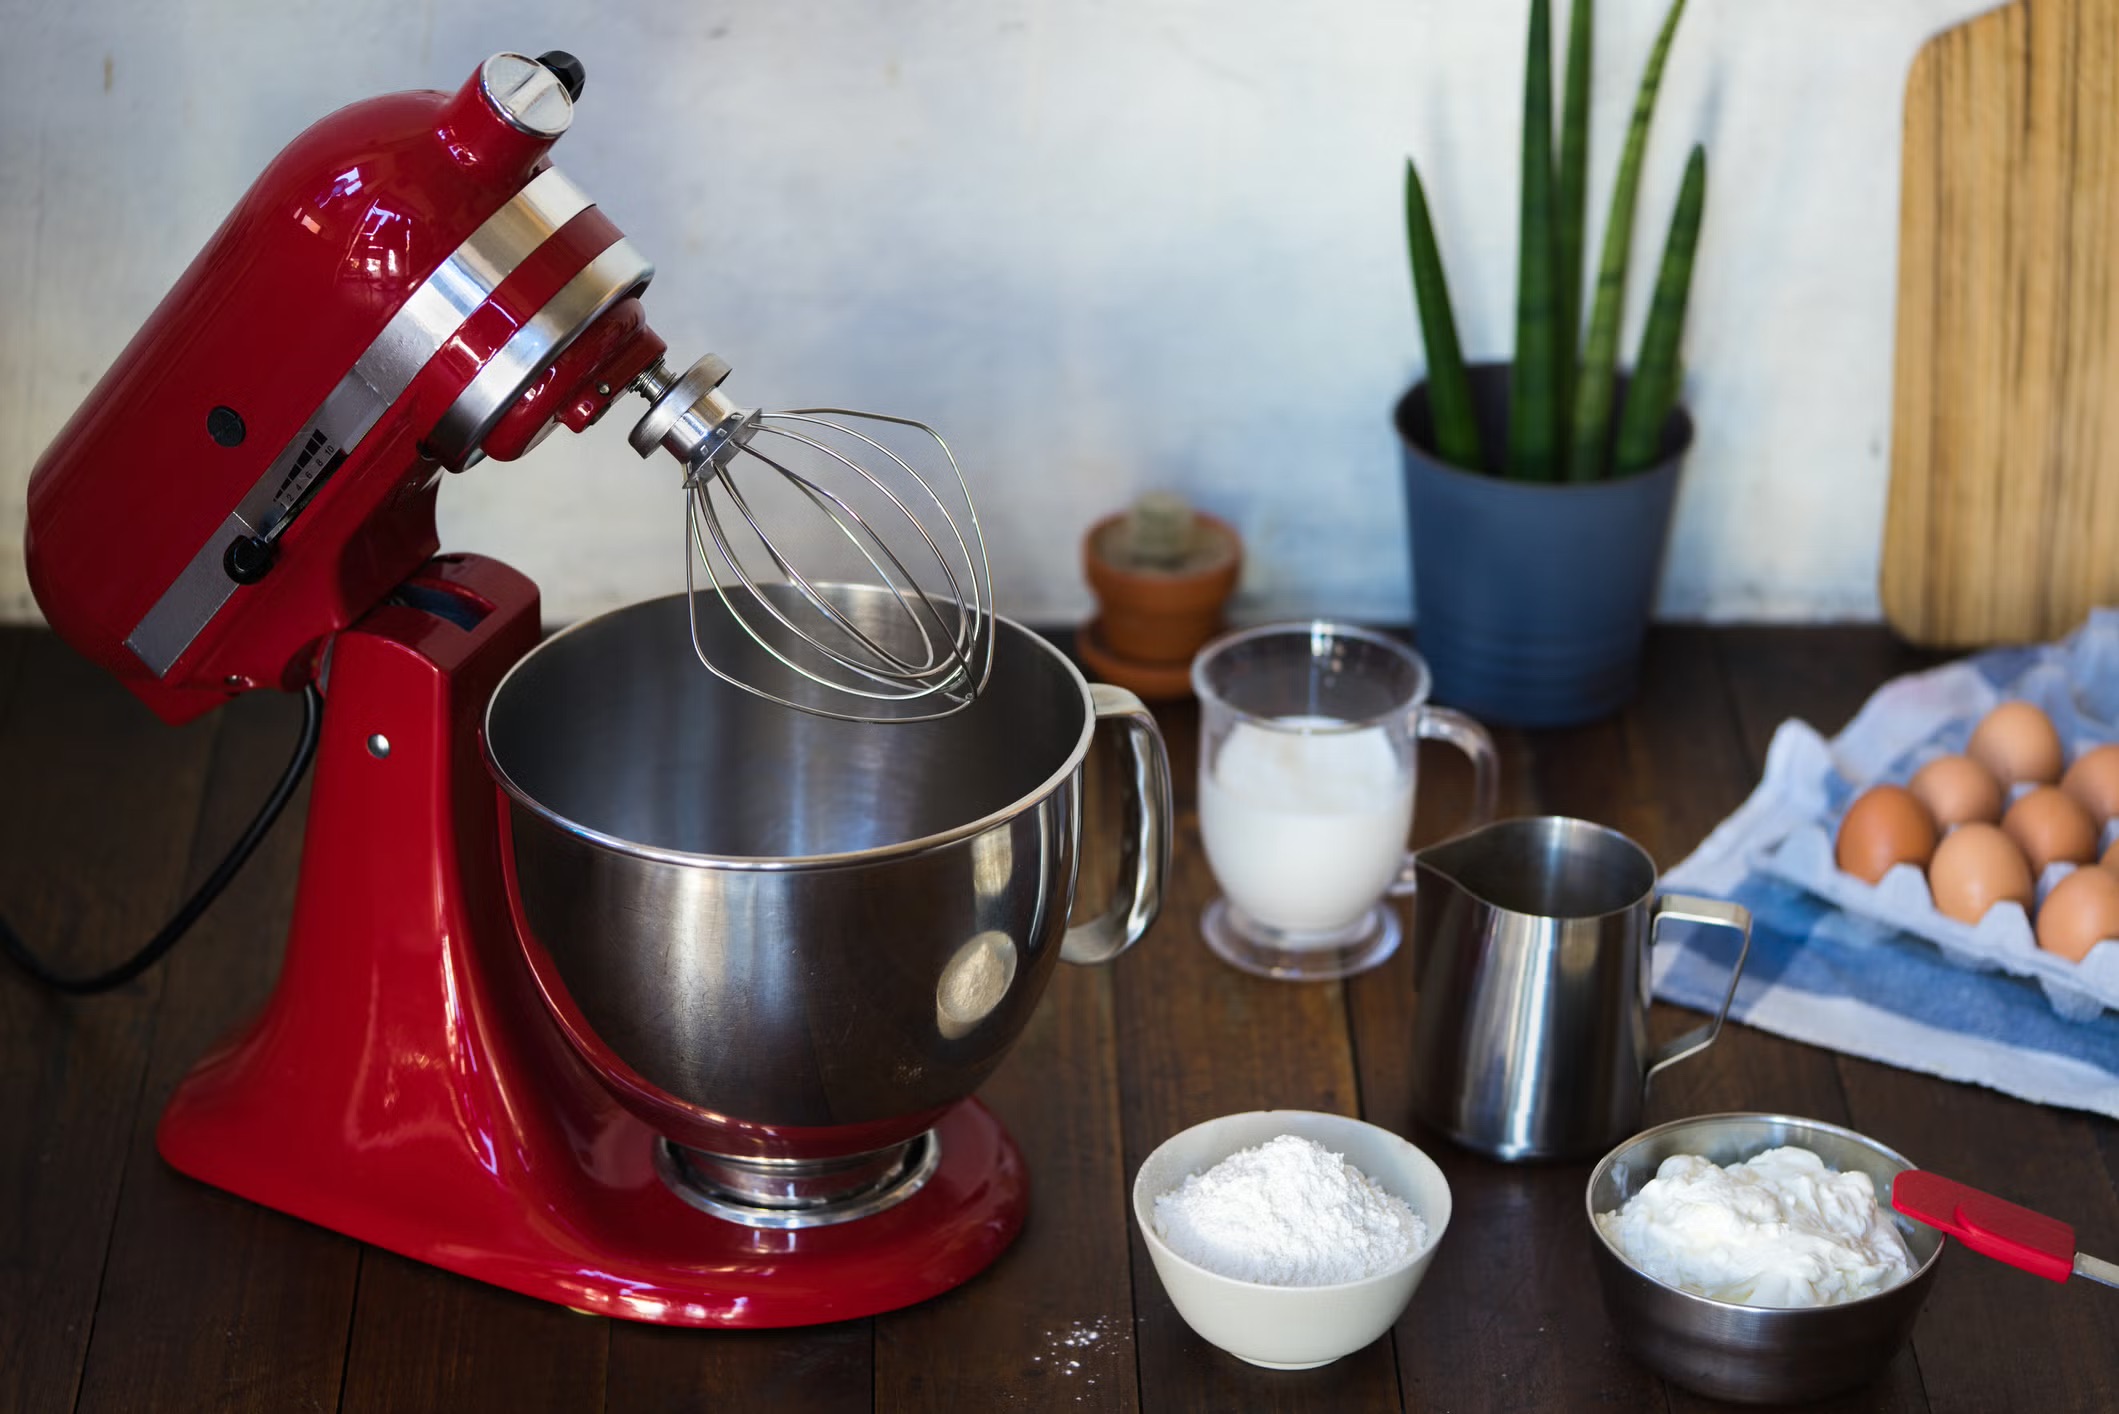 https://storables.com/wp-content/uploads/2023/07/what-can-i-make-with-a-stand-mixer-1689578707.jpeg